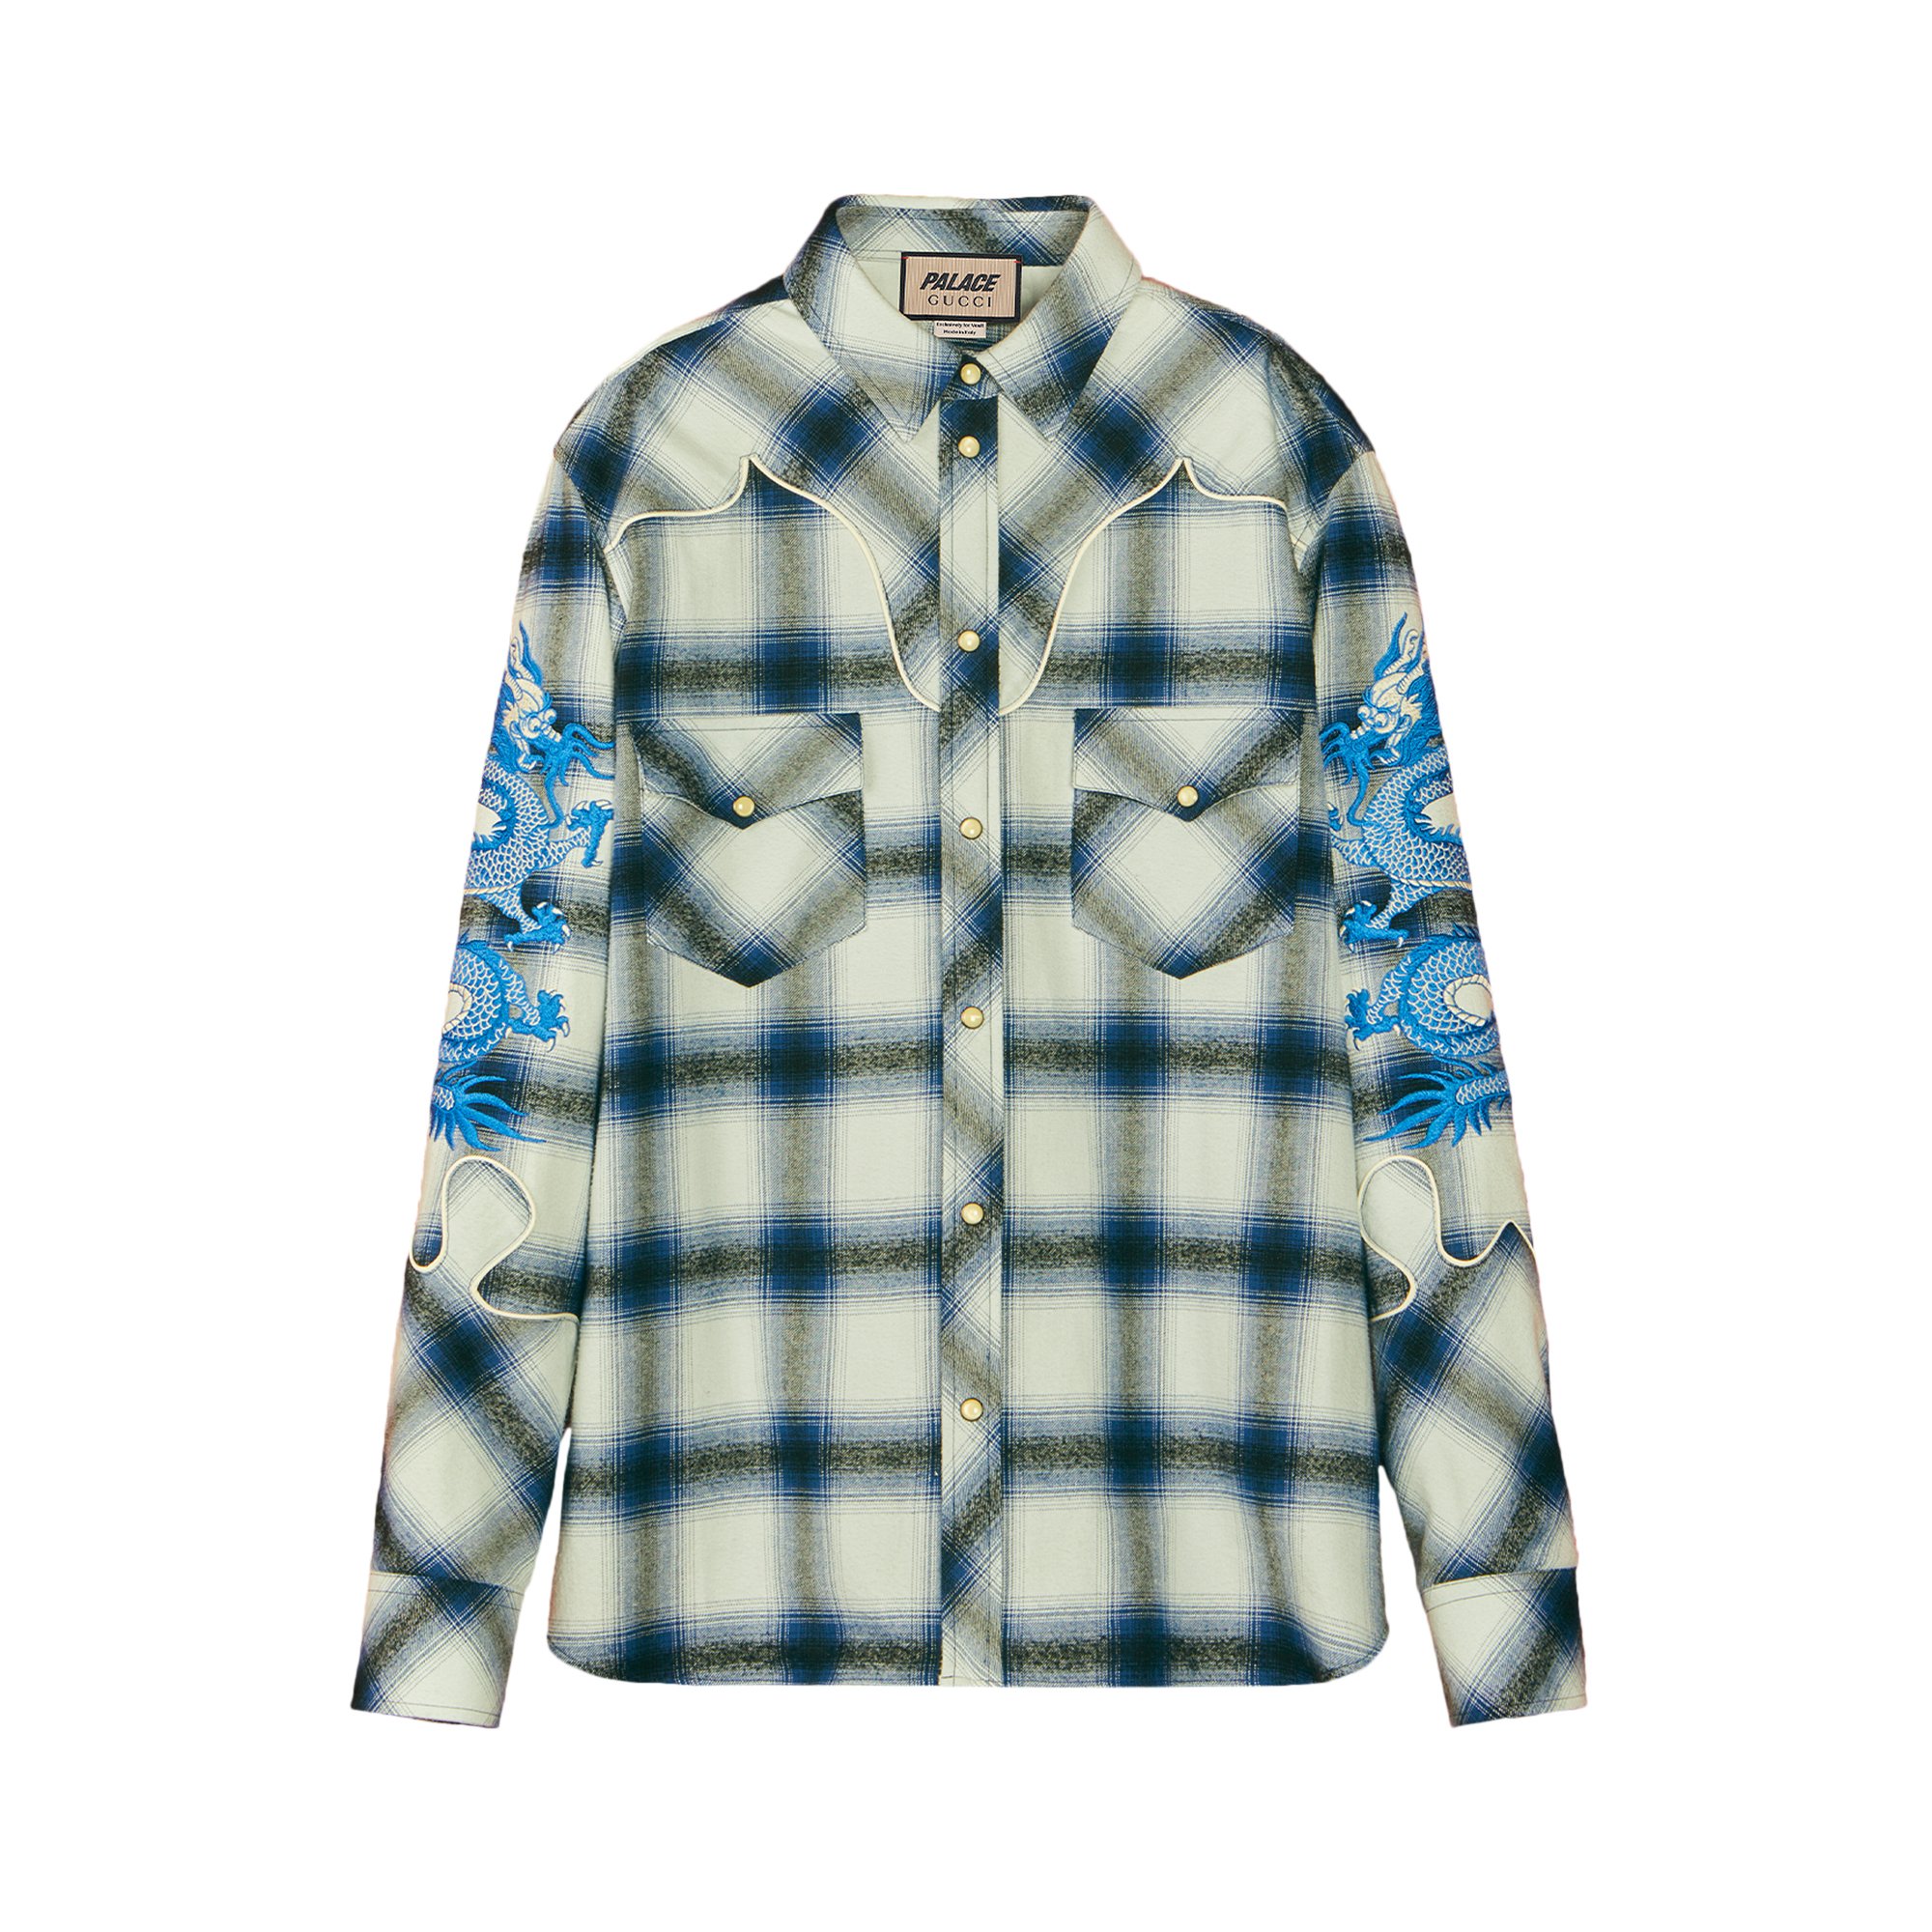 Buy Gucci x Palace Check Shirt With Embroidered Details 'Blue